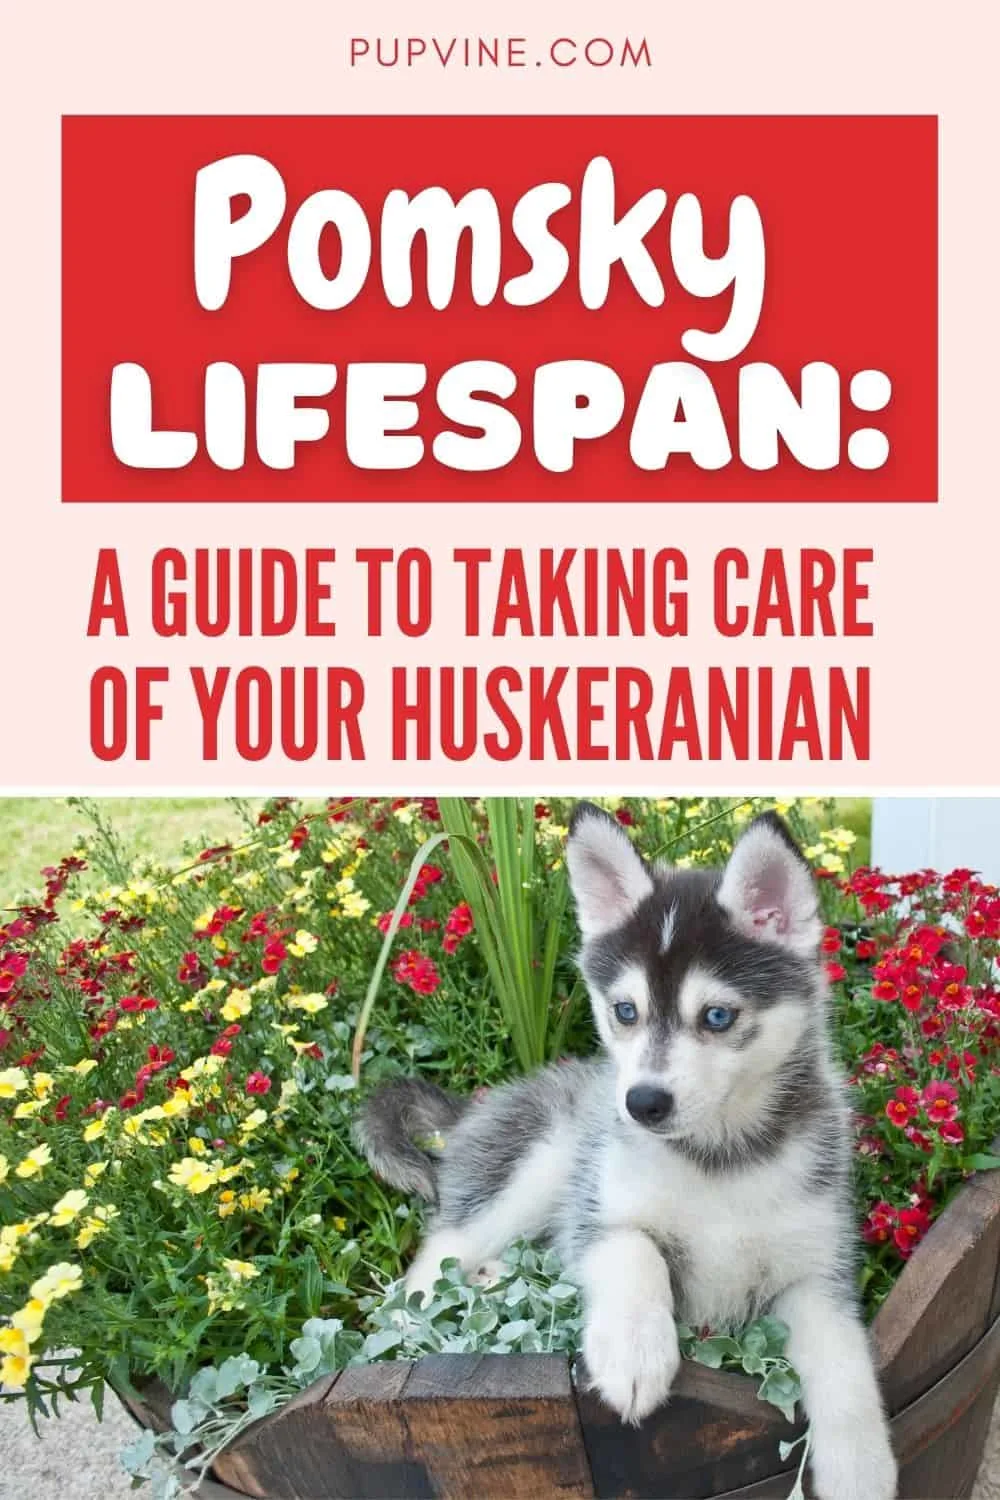 Pomsky lifespan: A Guide To Taking Care Of Your Huskeranian